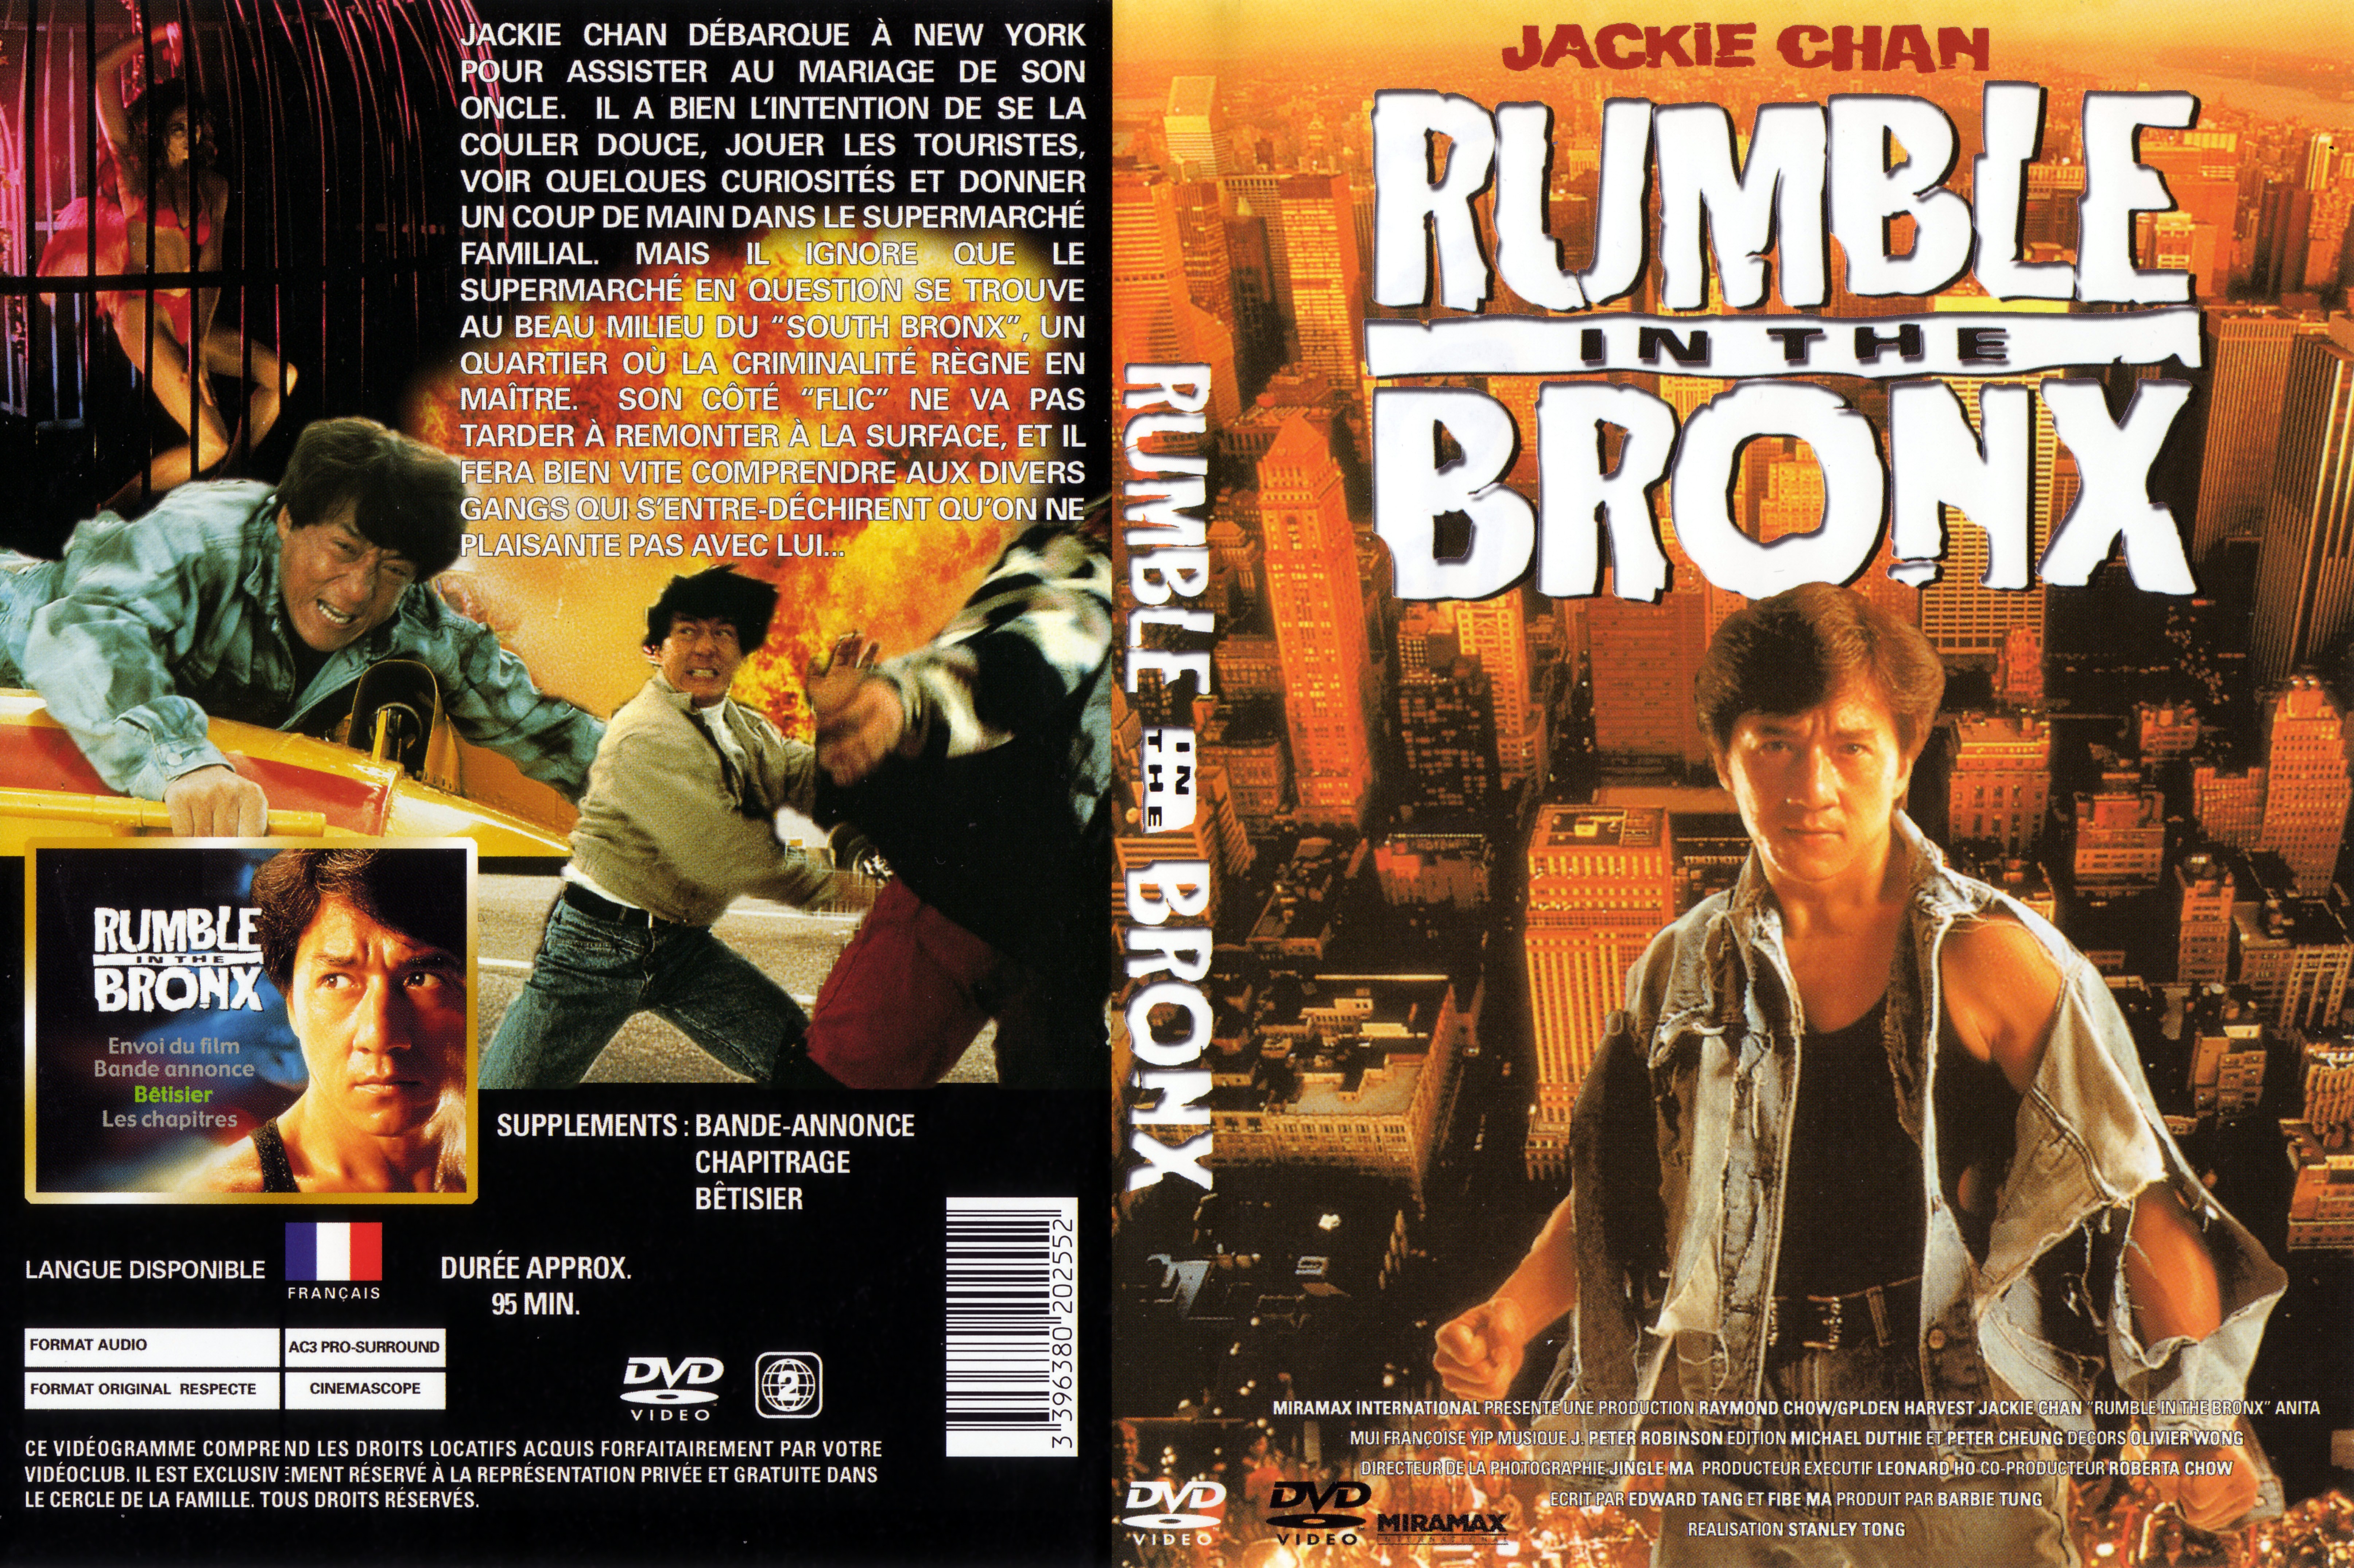 Jaquette DVD Rumble in the bronx v2